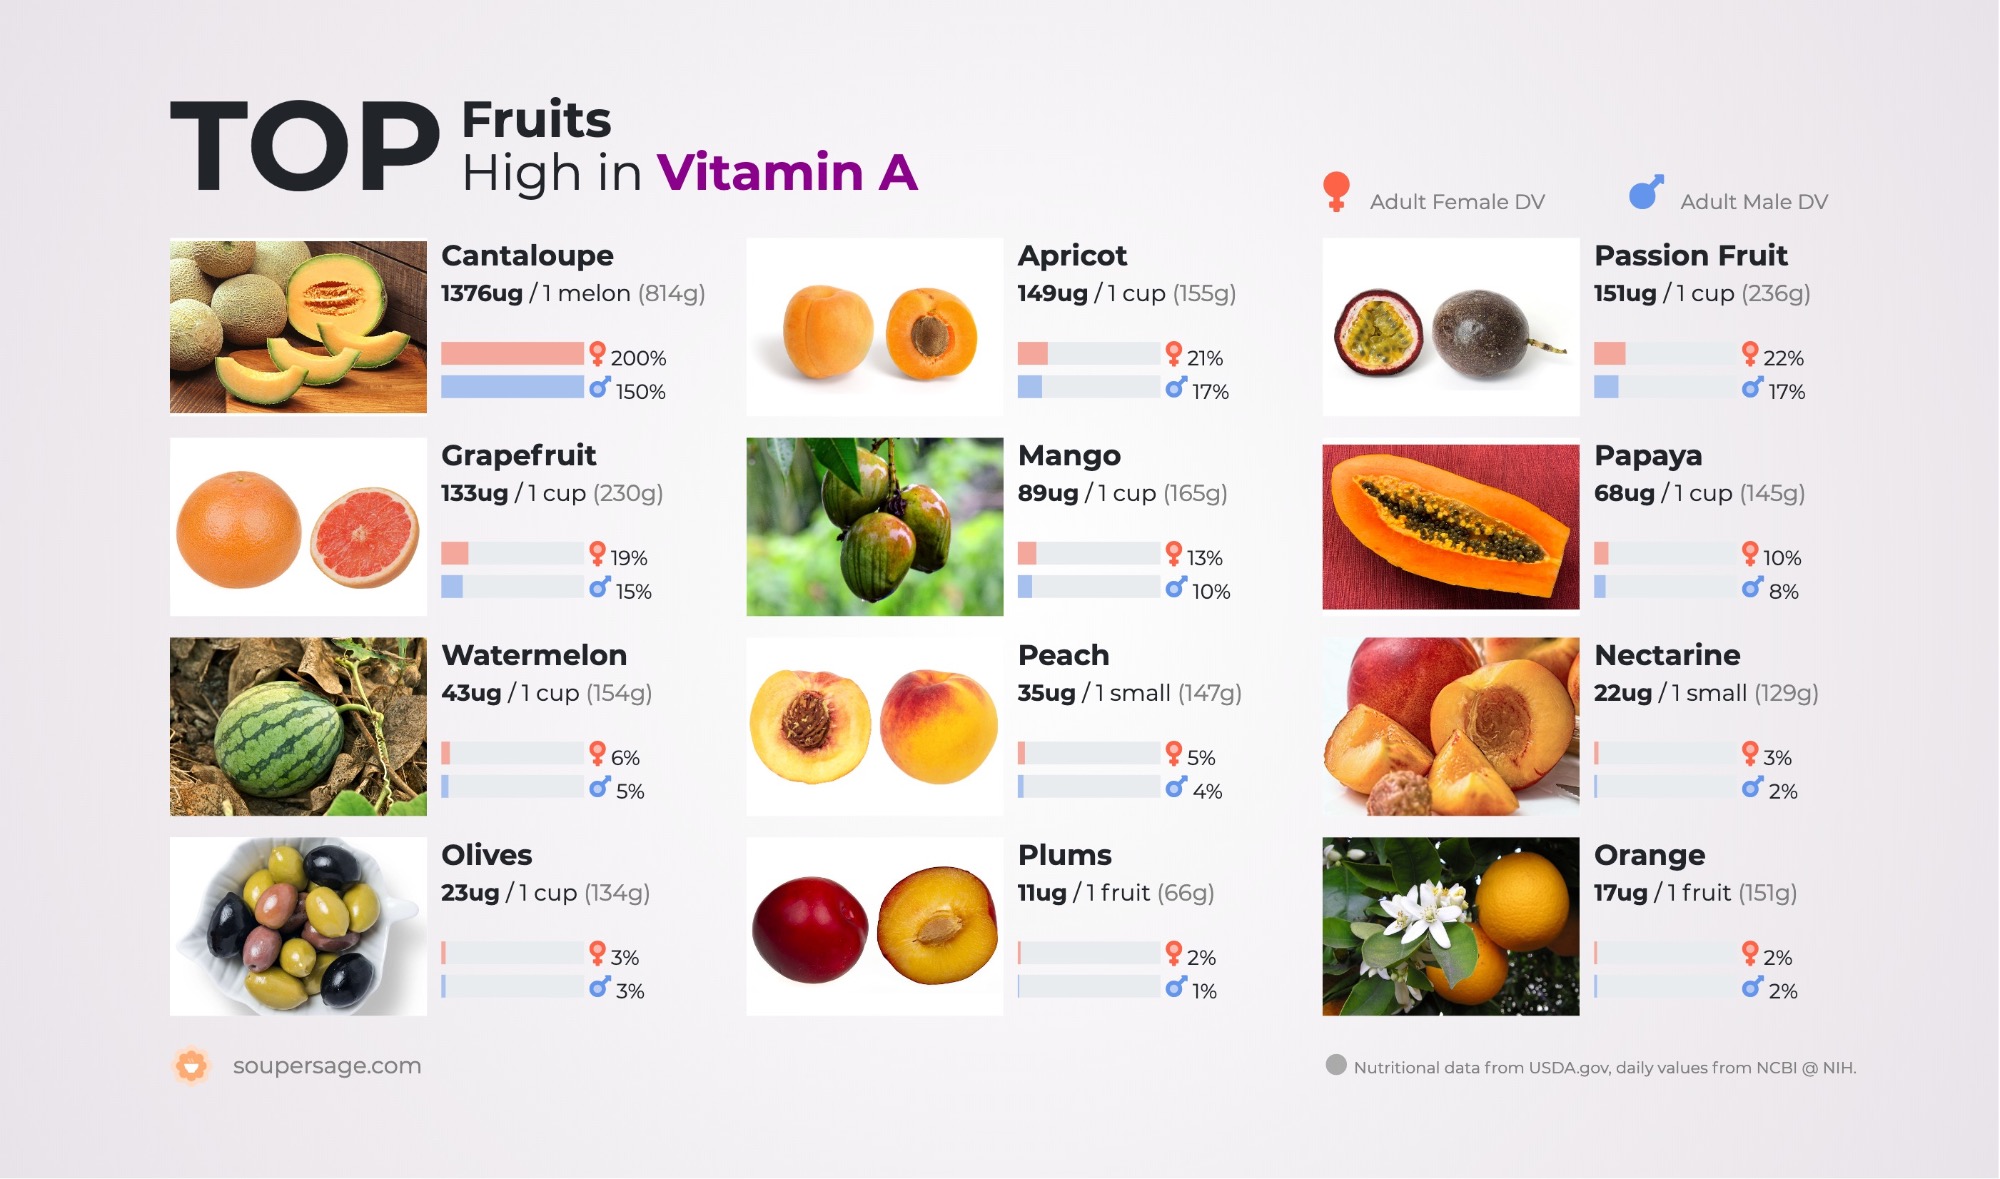 image of Top Fruits High in Vitamin A